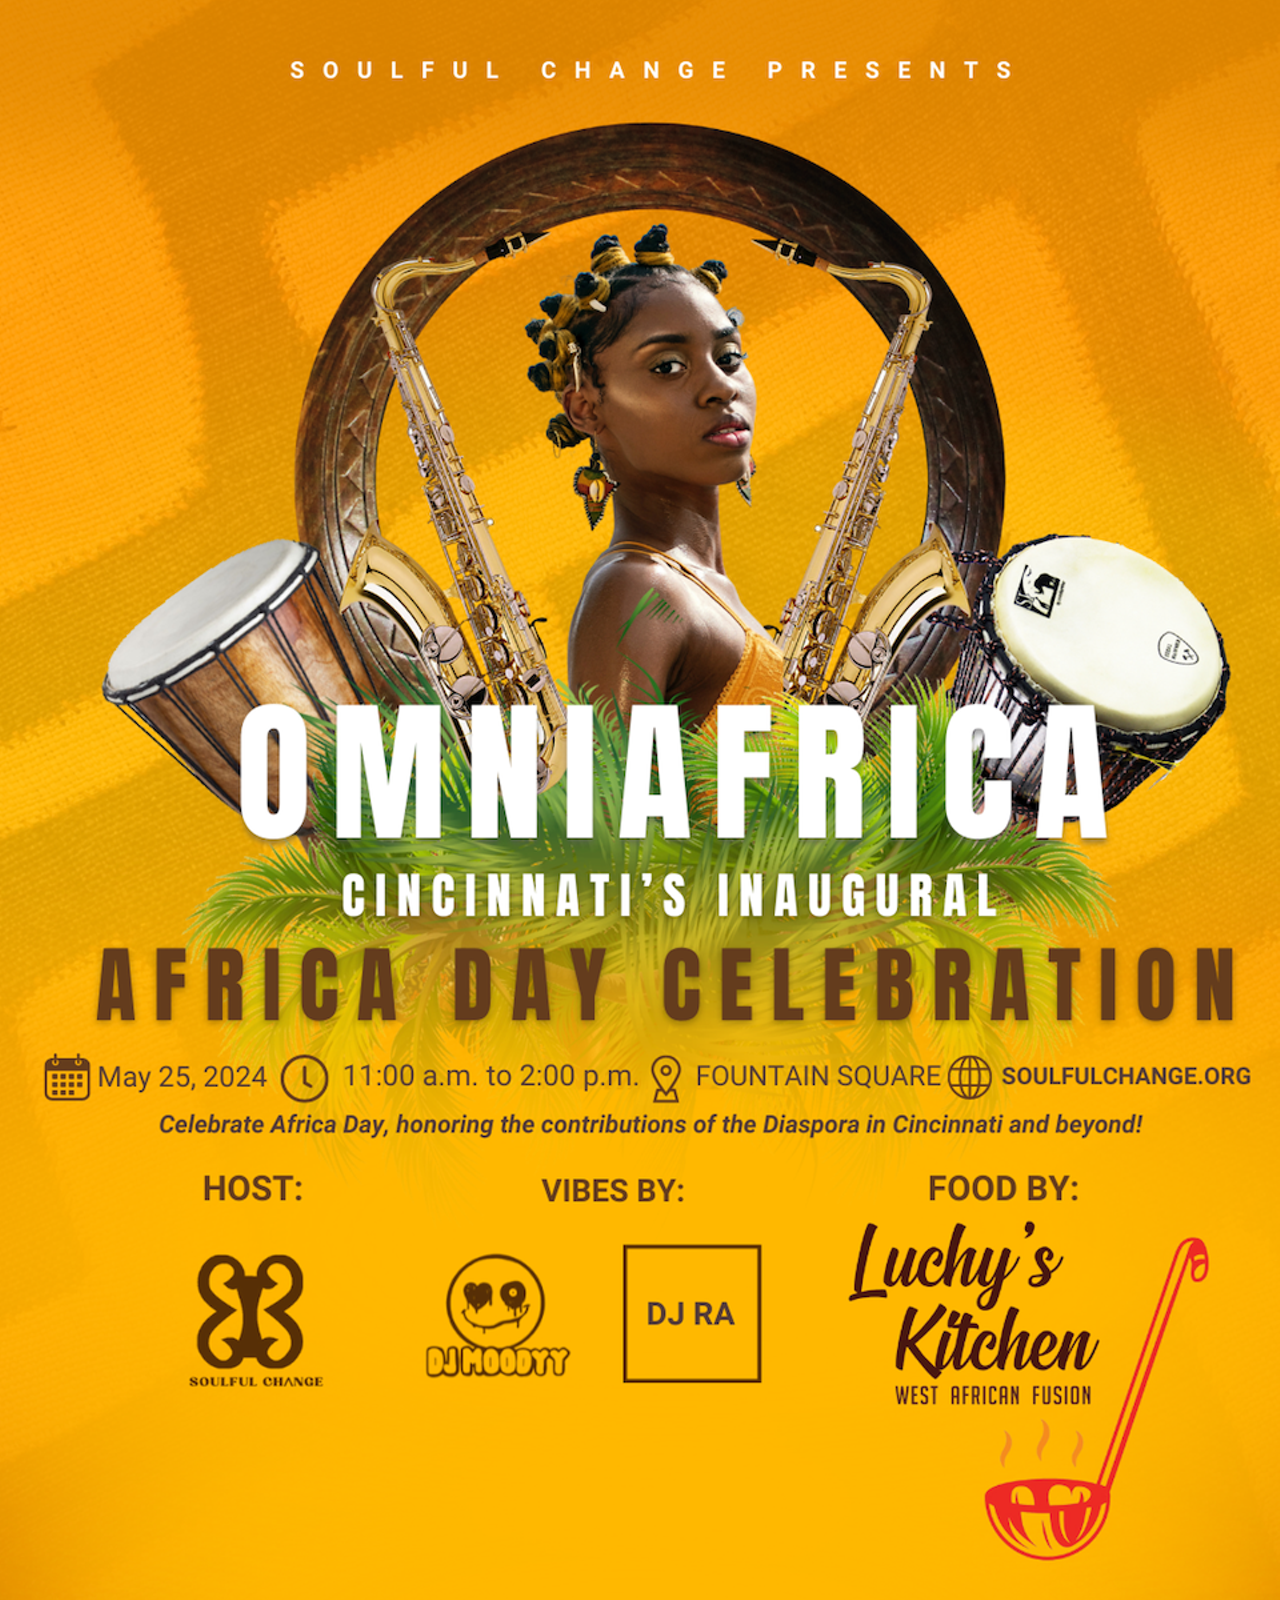 OMNIAFRICA: Cincinnati's Africa Day Celebration
When: May 25 from 11 a.m.-2 p.m.
Where: Fountain Square, Downtown
What: Celebrate Africa Day with music, dance, food and networking.
Who: Soulful Change
Why: Learn more about the contributions of the African diaspora in Greater Cincinnati.